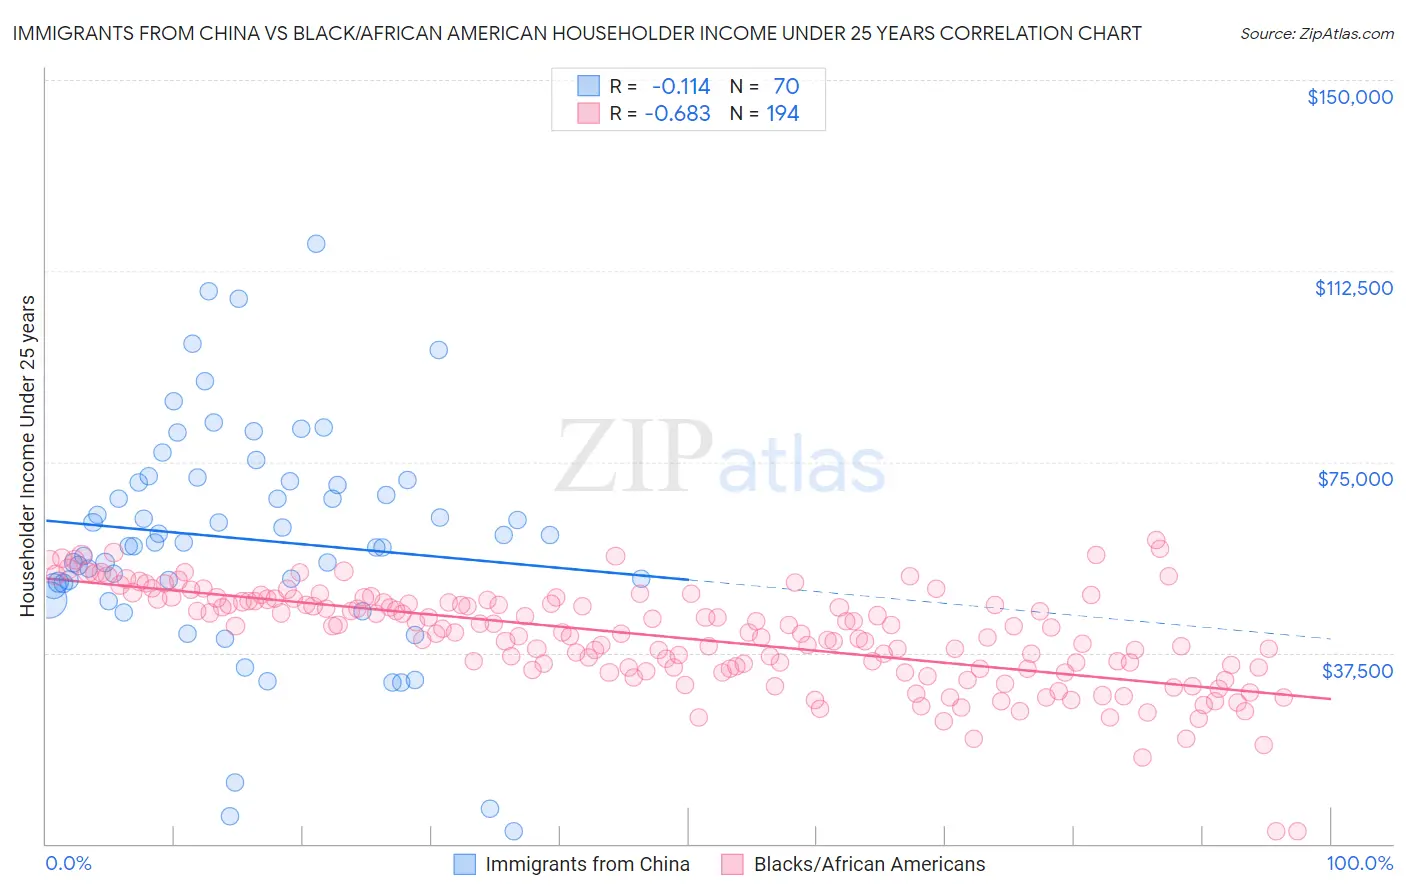 Immigrants from China vs Black/African American Householder Income Under 25 years